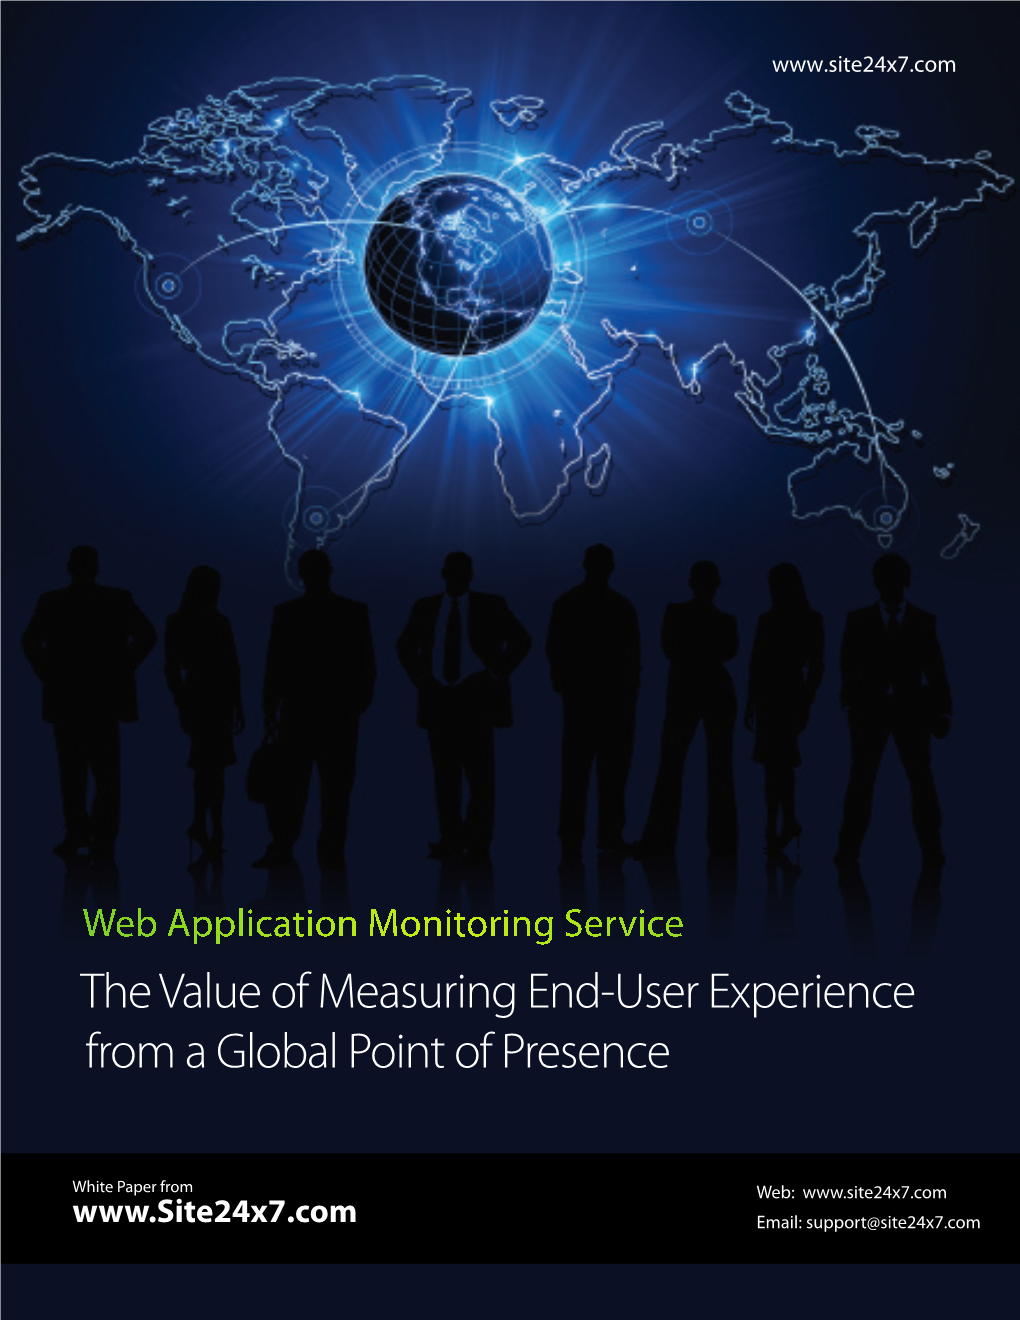 The Value of Measuring End-User Experience from a Global Point of Presence